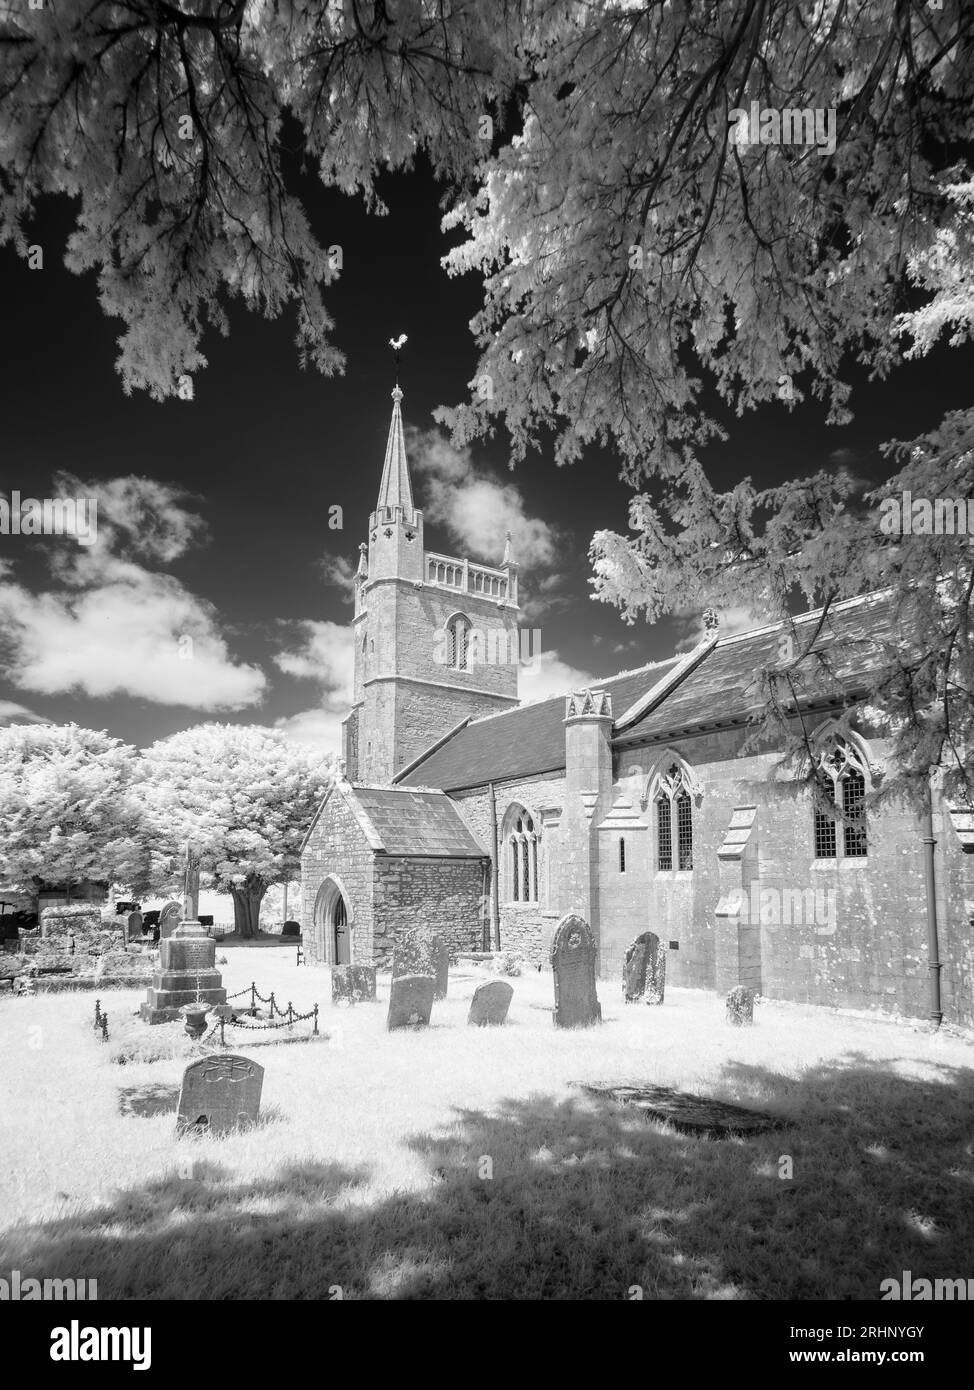 The church of St Mary in the village of Nempnett Thrubwell, Somerset, England. Stock Photo